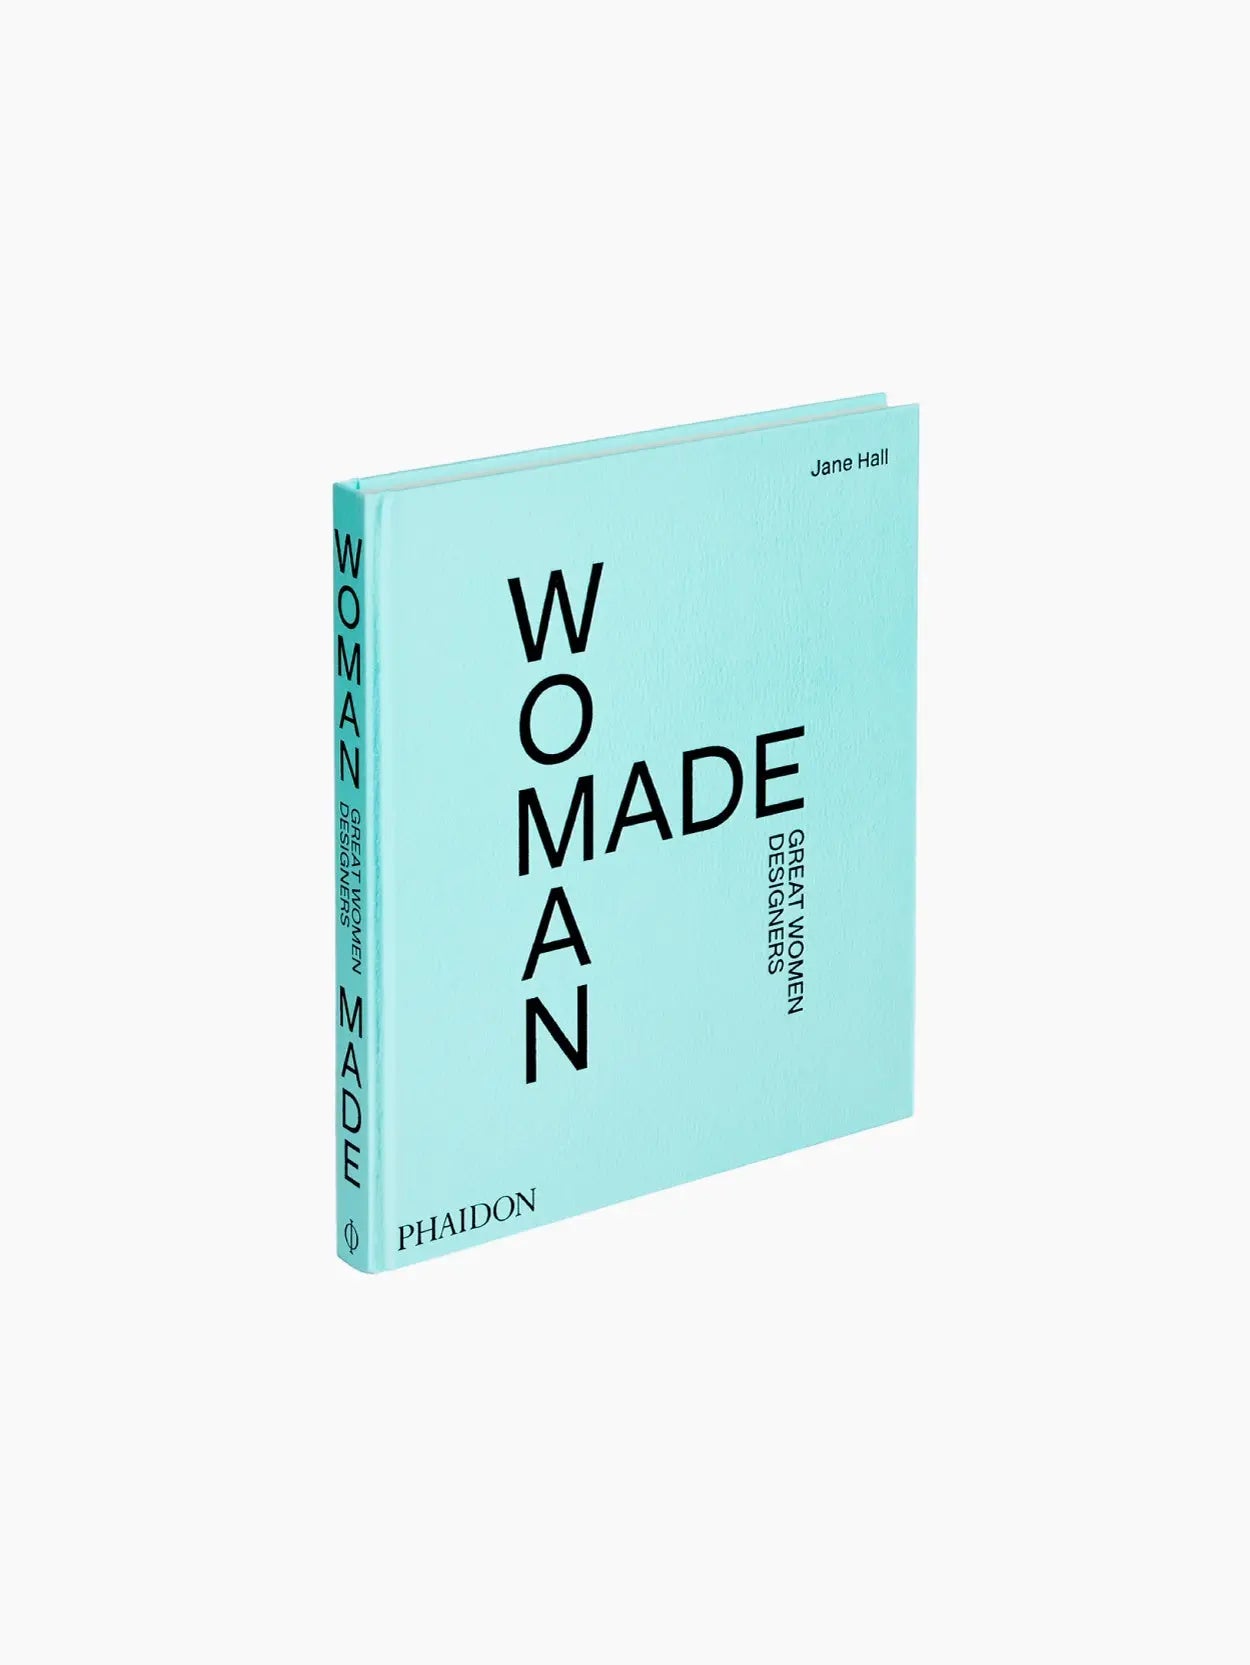 A turquoise cover of the book titled "Woman Made: Great Women Designers" by Jane Hall is elegantly displayed. The title appears vertically and horizontally in black text on the front, with "Phaidon" mentioned on the spine and bottom left corner. Available exclusively at Bassalstore in Barcelona.